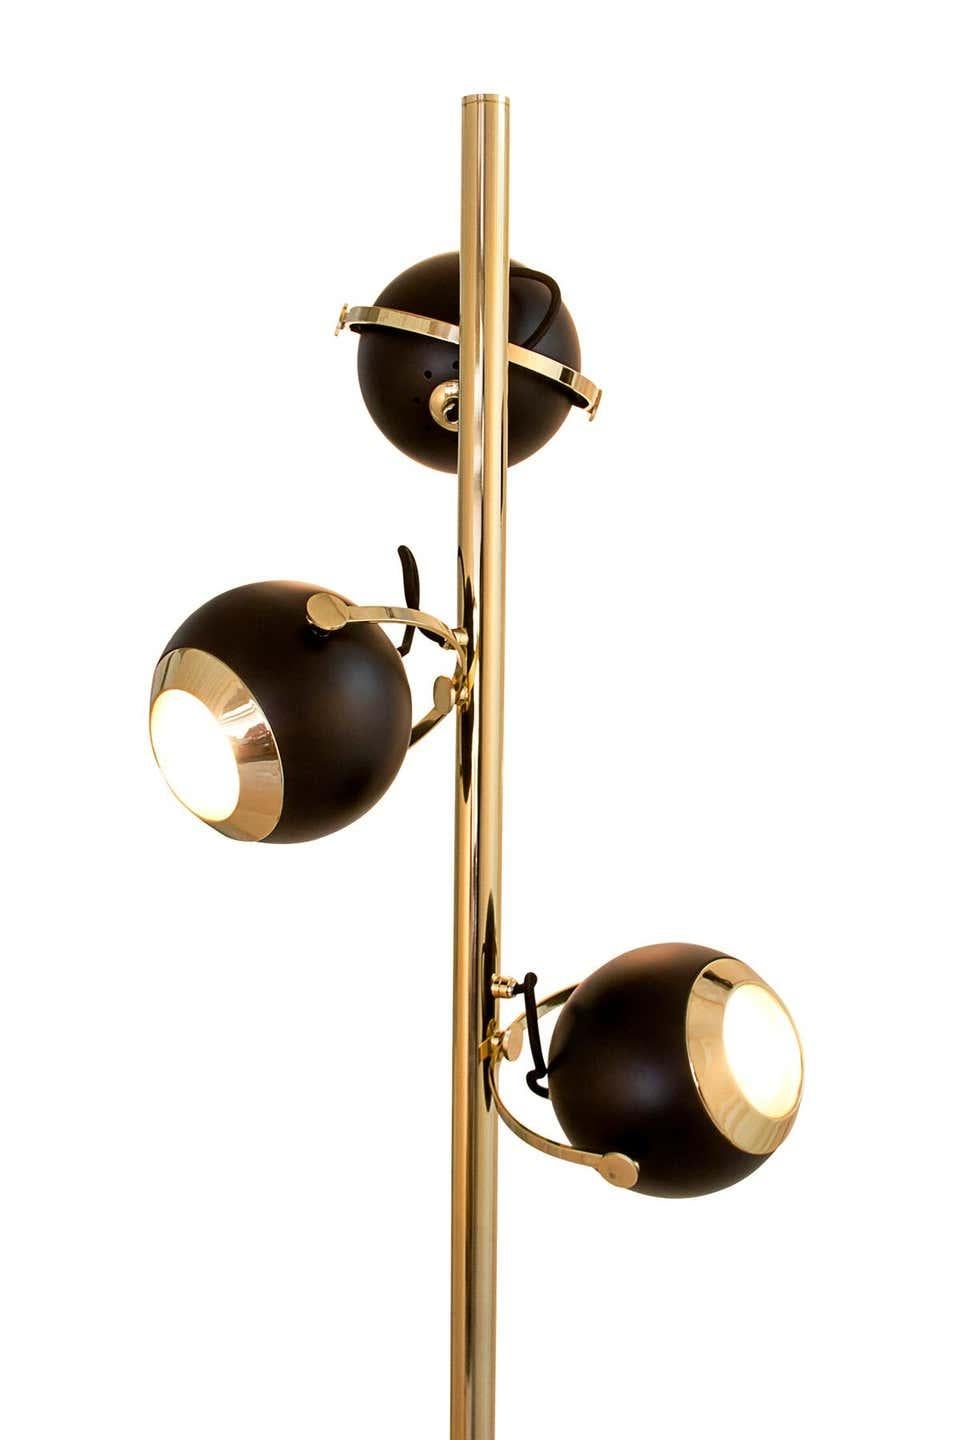 Aluminum Floor Lamp in Brass and Gold Details For Sale